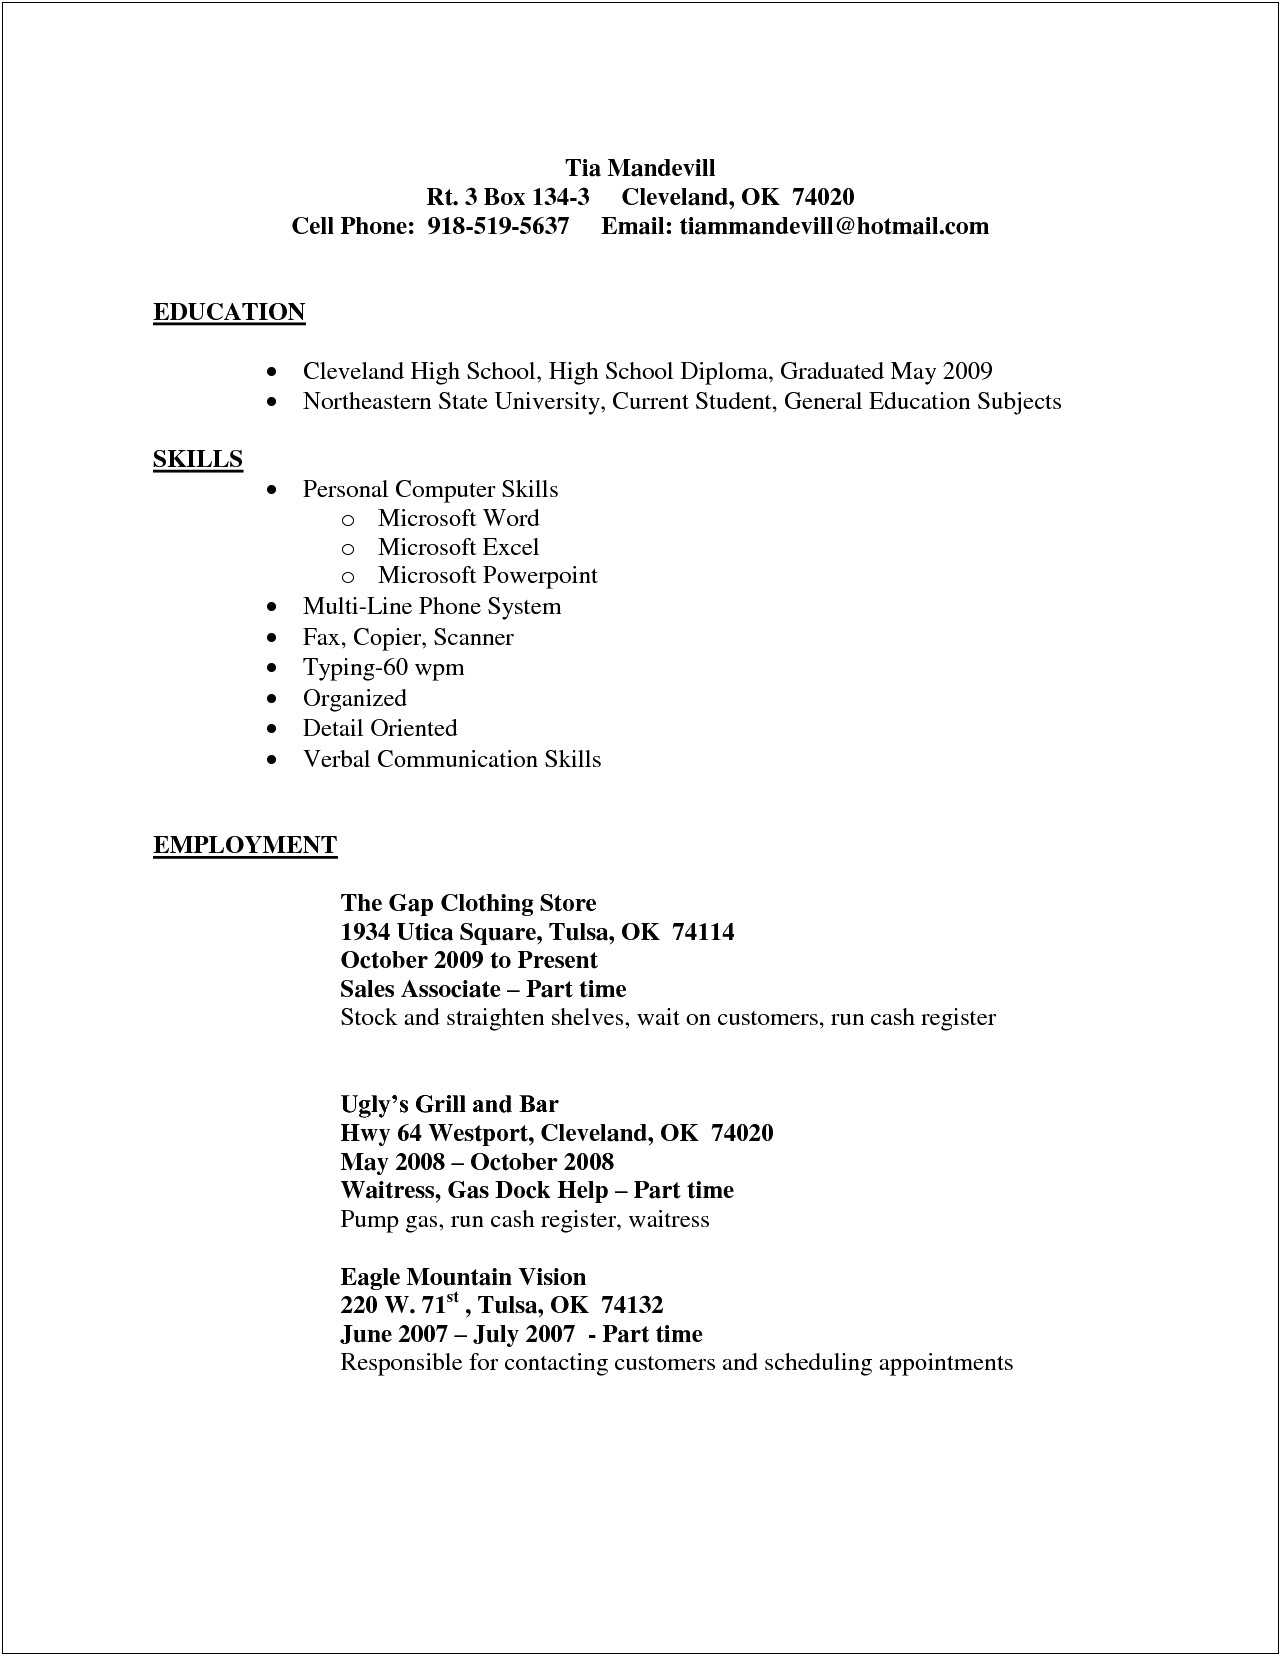 Resume For Big Box Retail Assistant Manager Samples